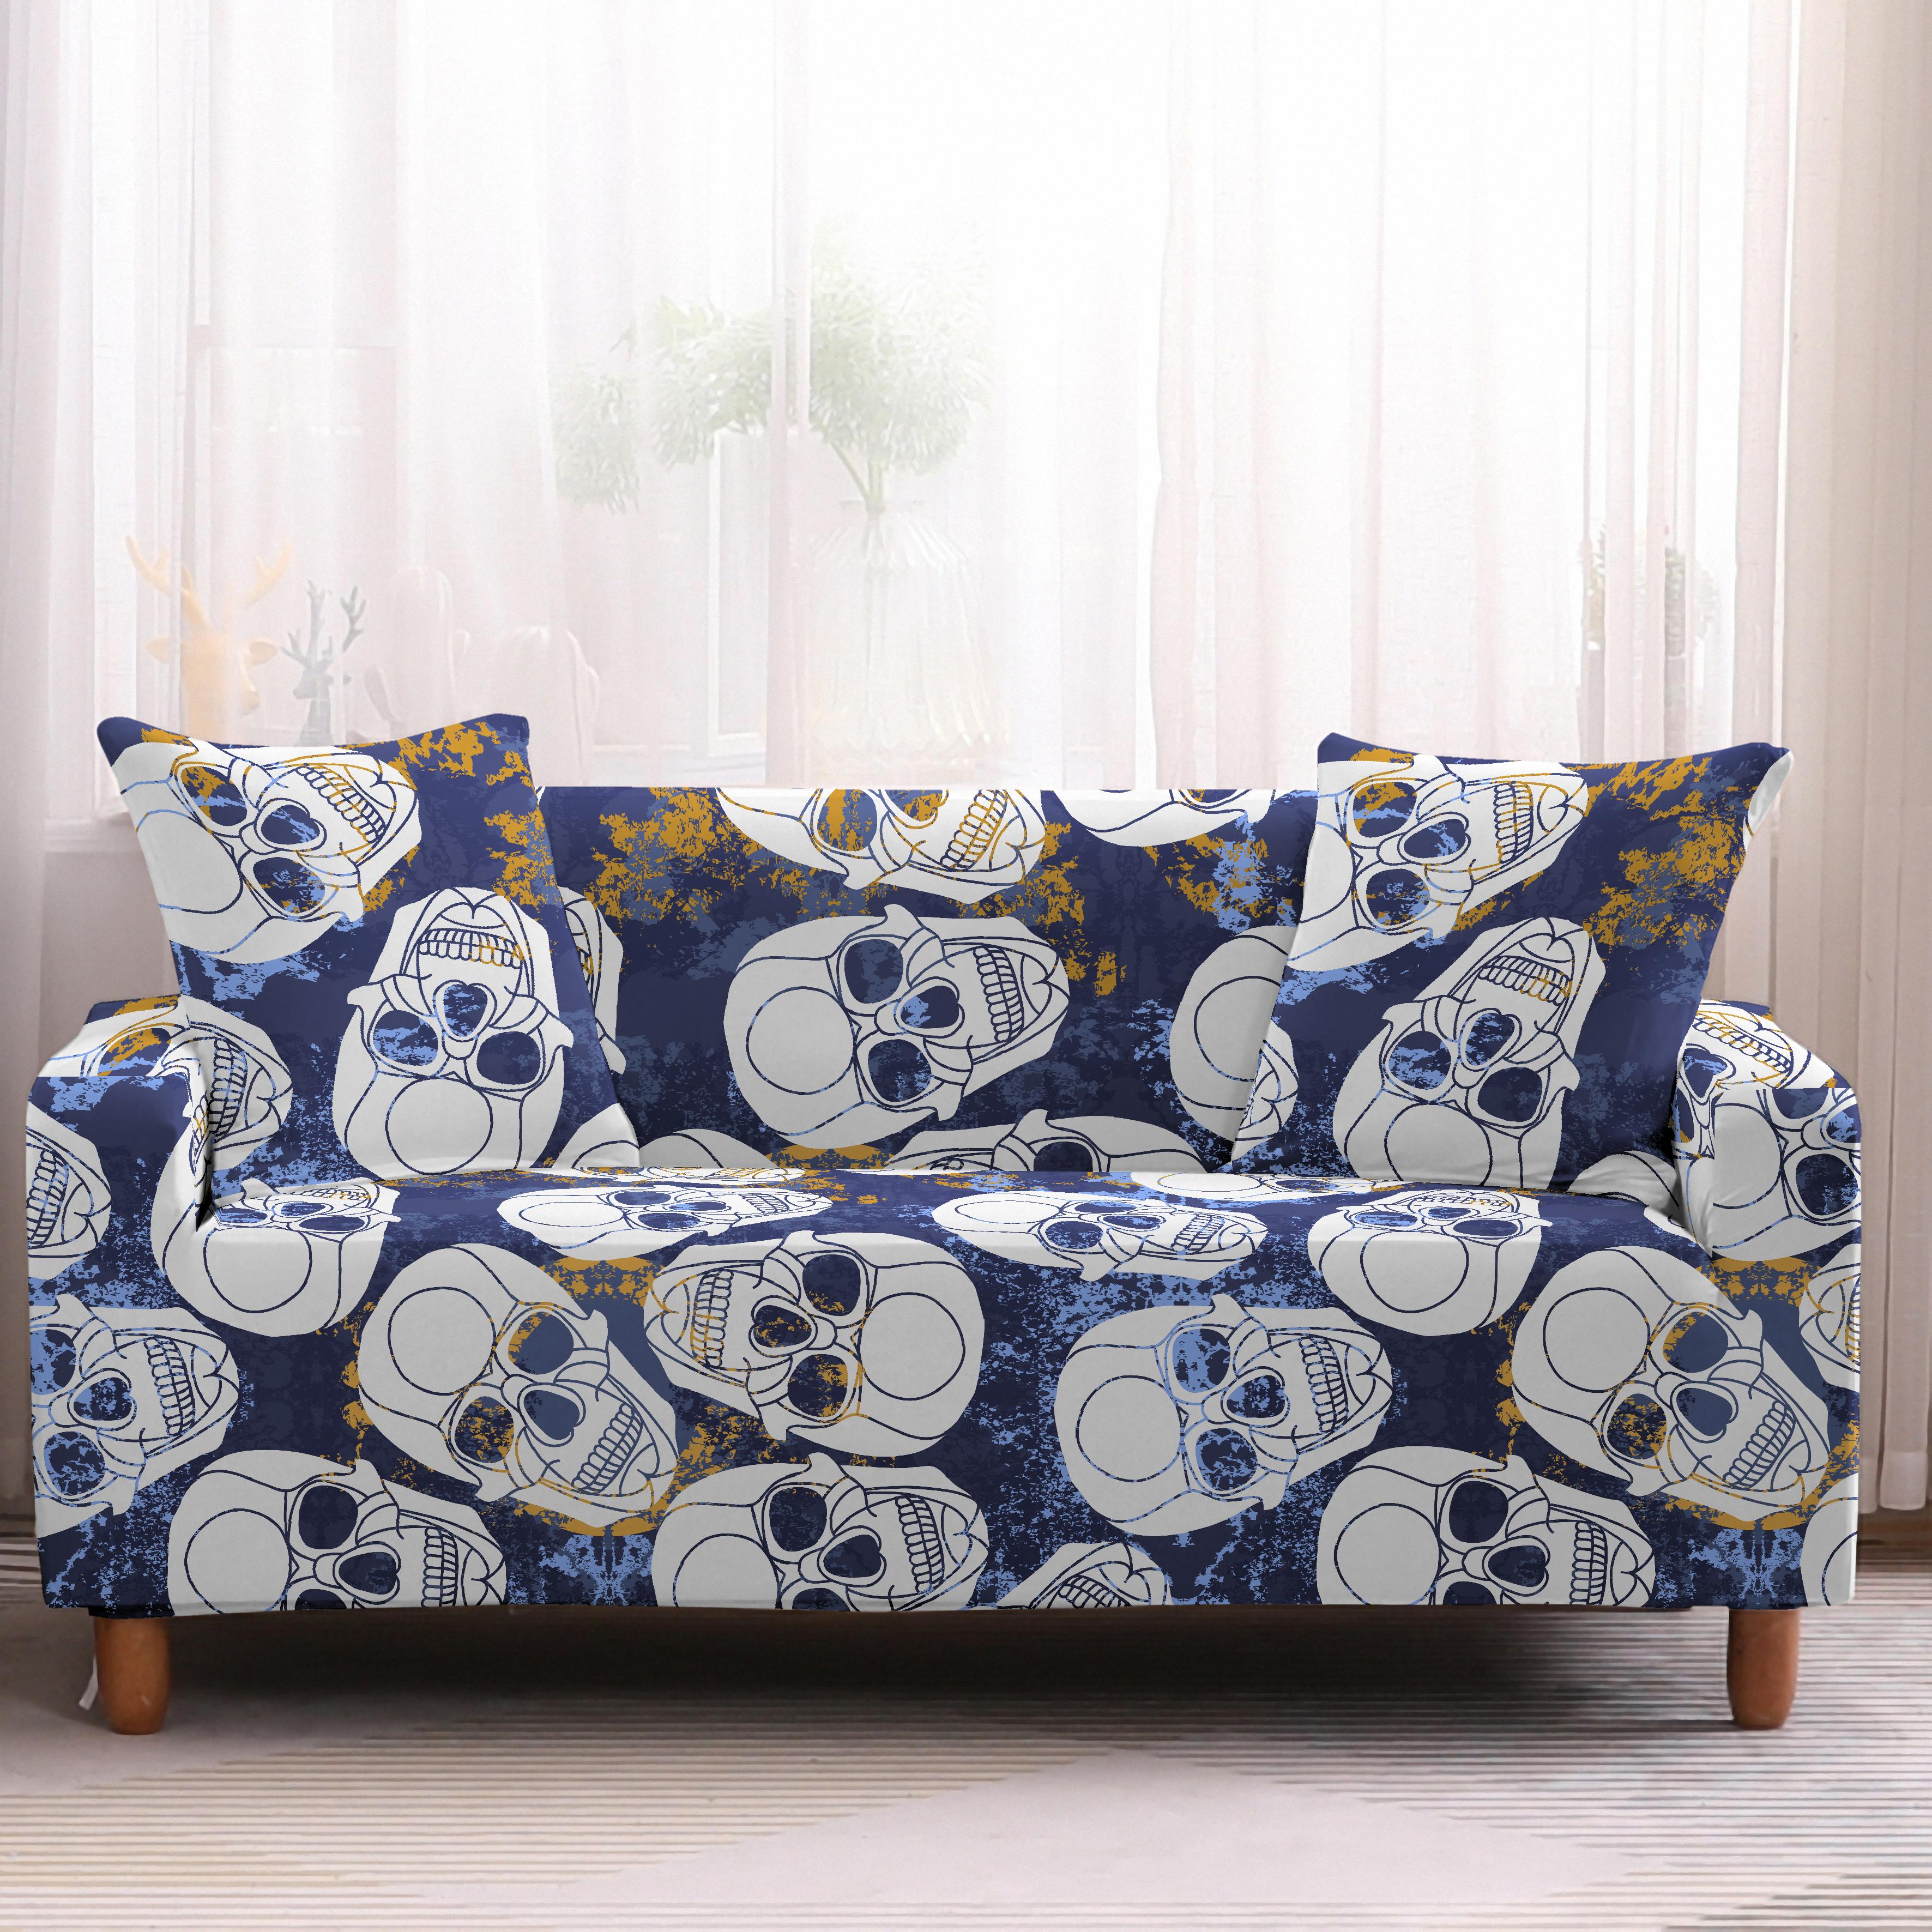 Skull Sofa Cover Elastic Stretch Modern Chair Couch Cover Sofa Covers for Living Room Furniture Protector 1/2/3/4 Seater